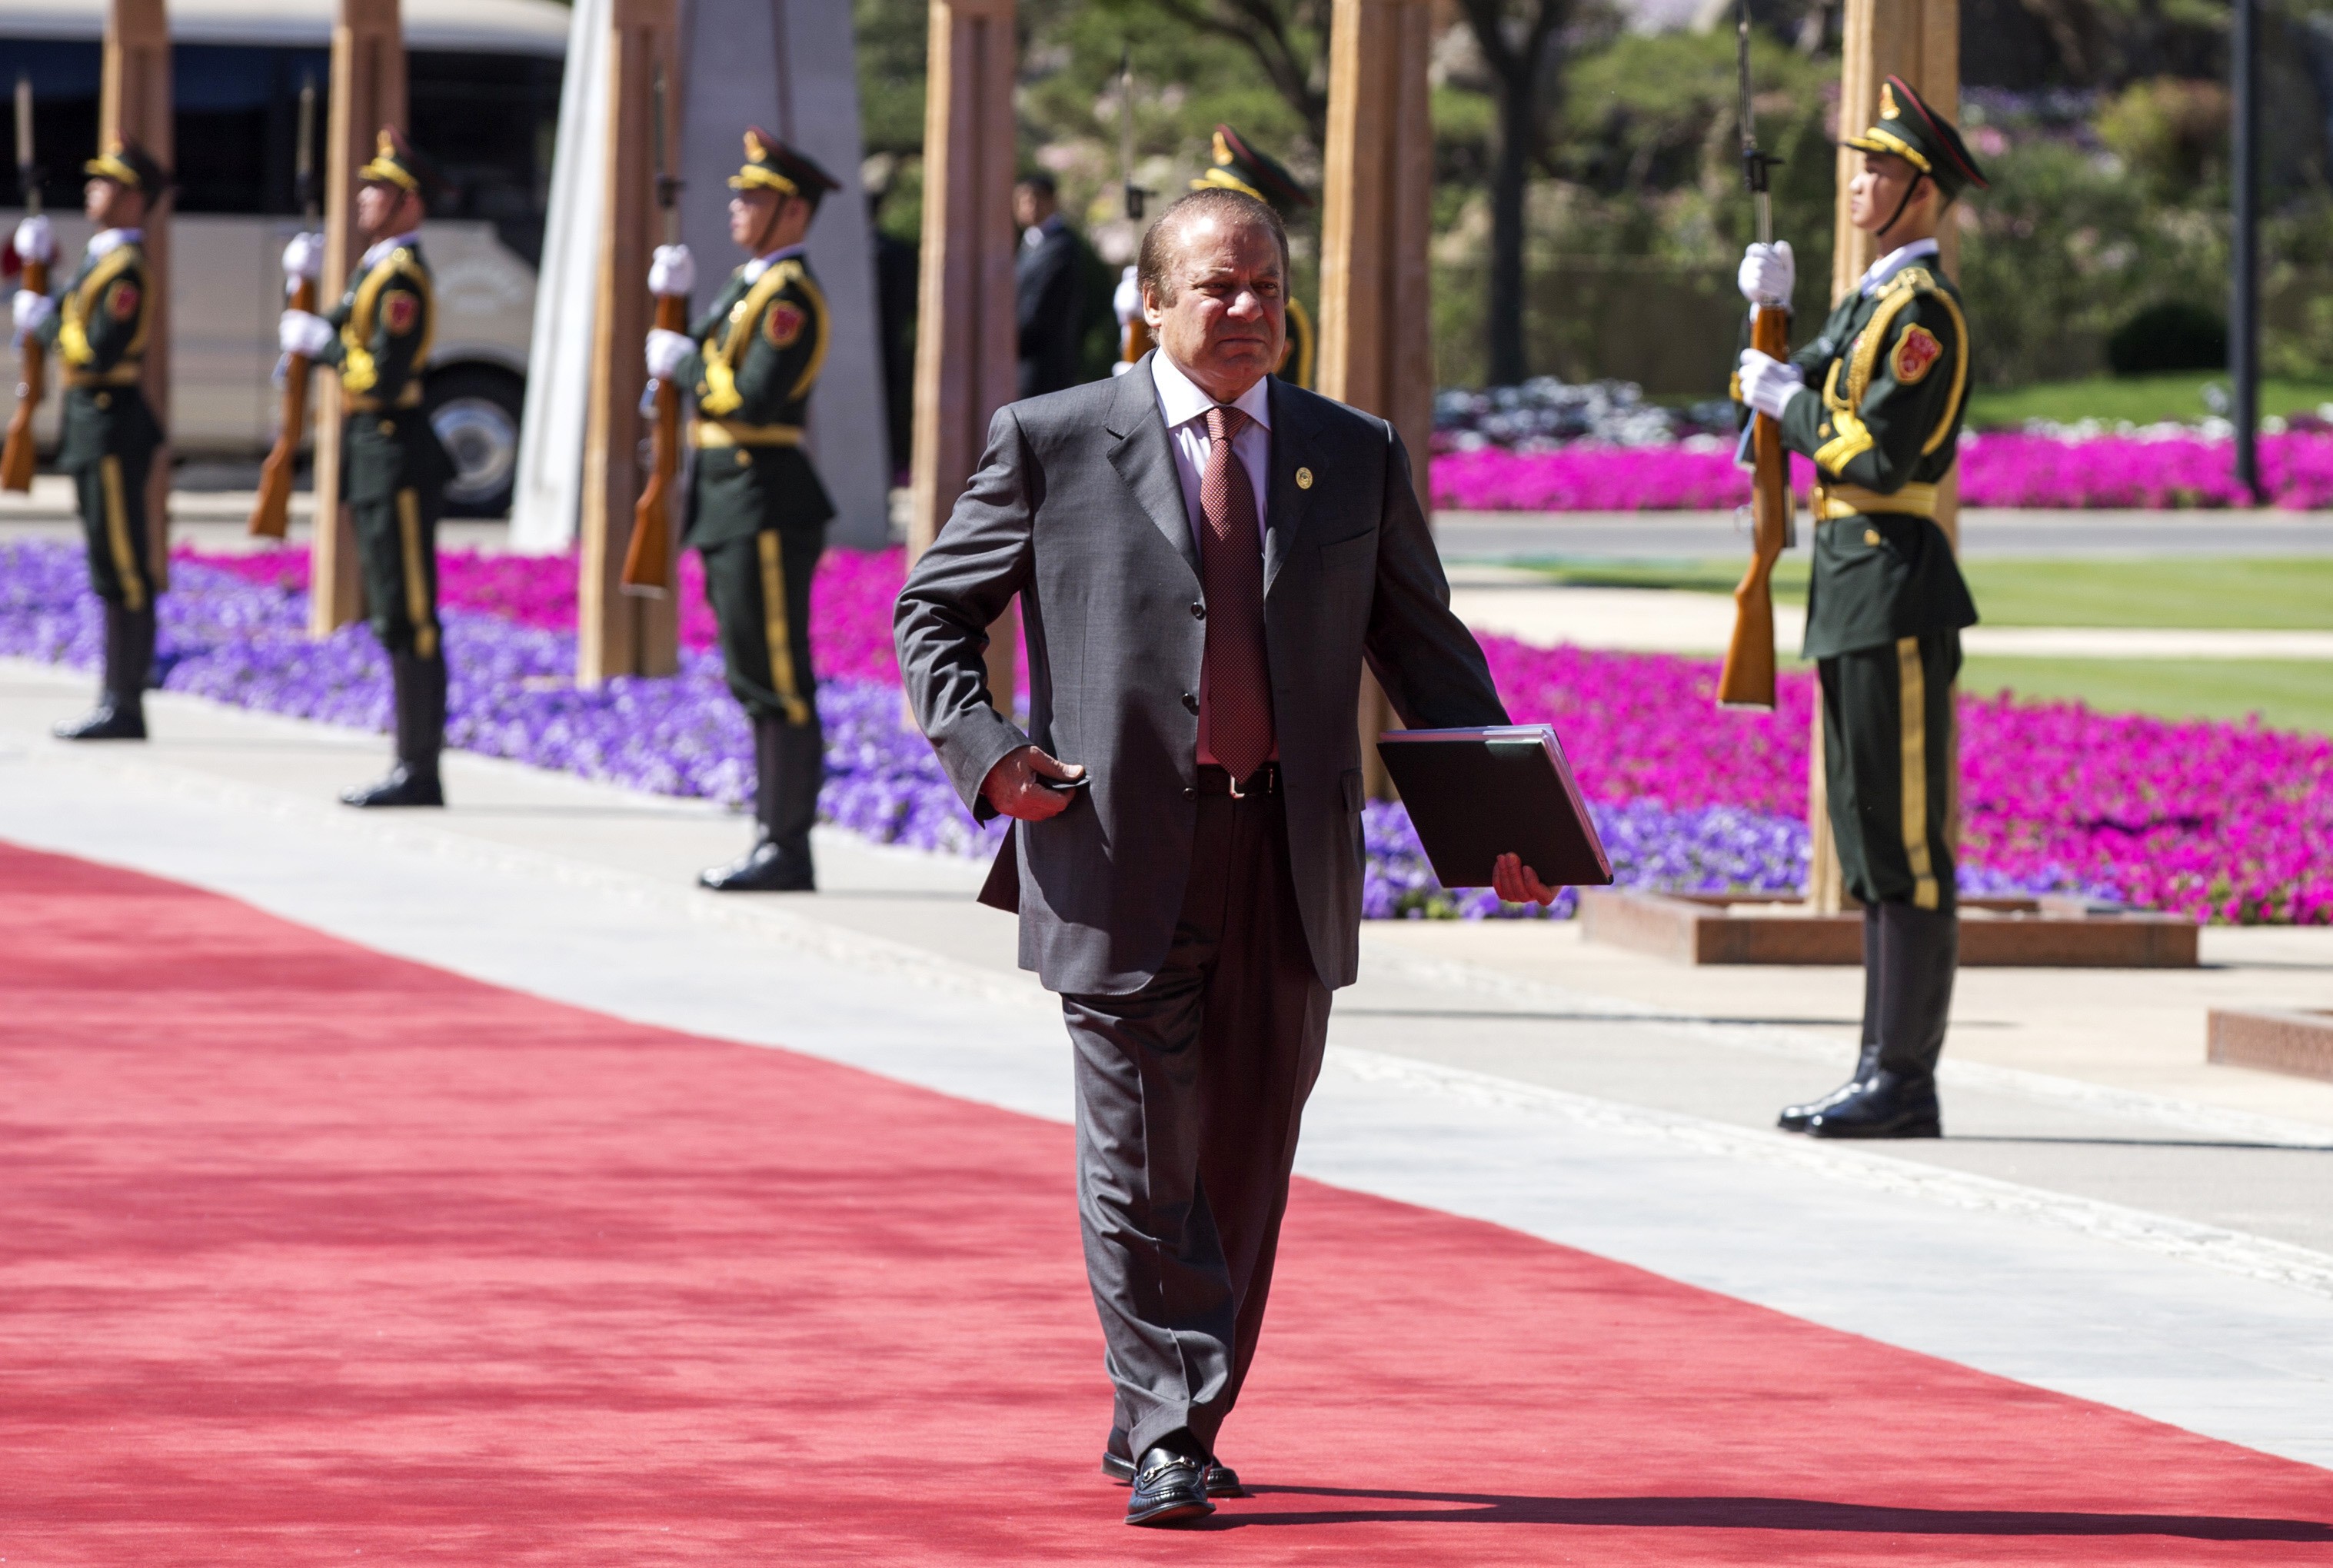 Prime Minister Nawaz Sharif arriving in Beijing for the Belt and Road Forum on Monday. Photo: Xinhua